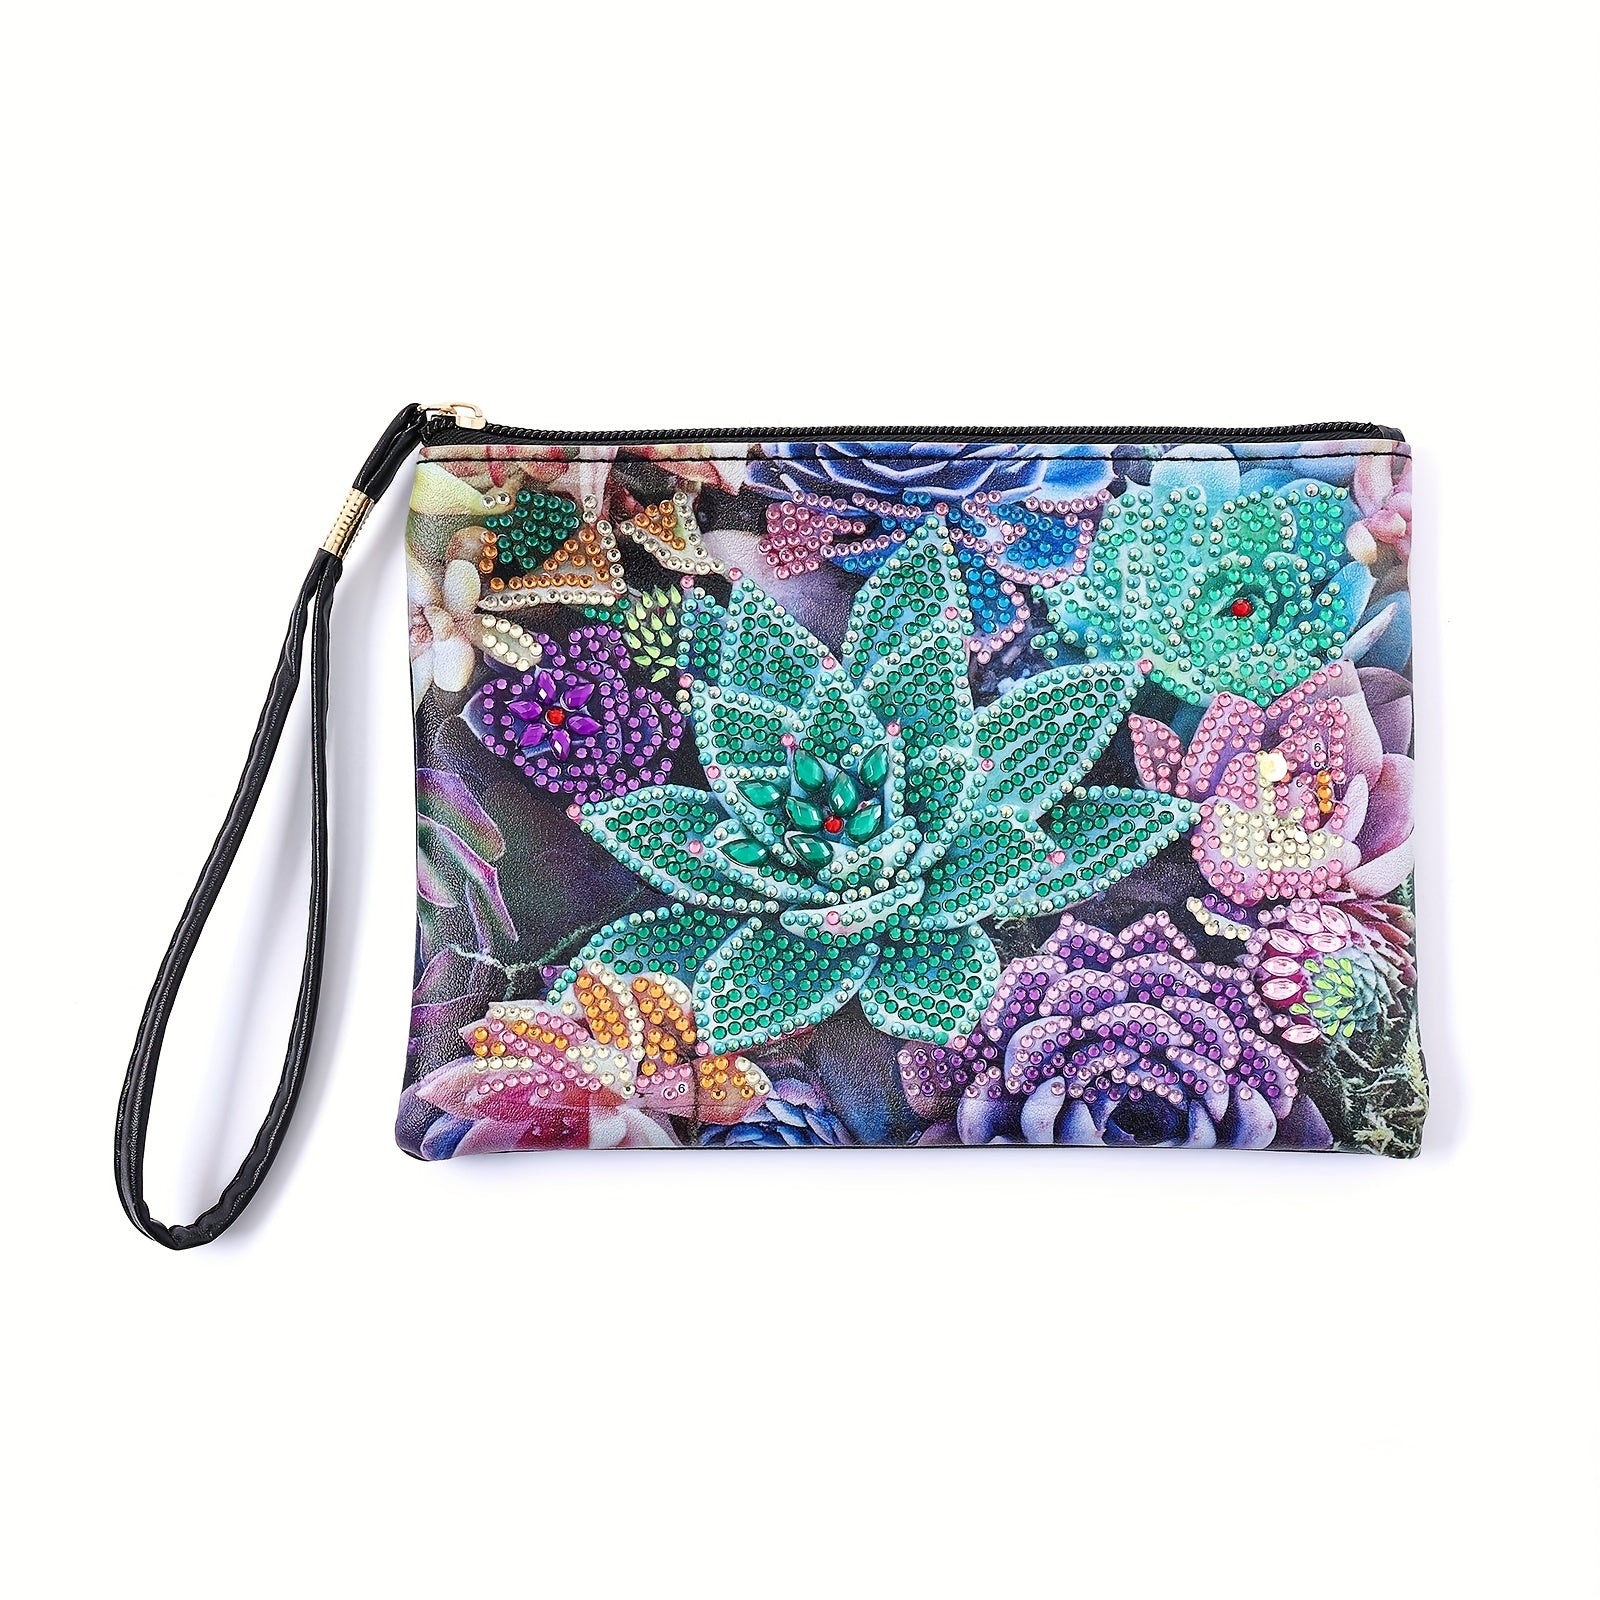 Succulent Painting Kit Plant Style DIY Artificial Diamond Painting Handbag 5D DIY Diamond Painting Clutch Handbag Handmade Diamond Art Wristband Clutch Bag With Zipper Ladies Art Craft Makeup Gift